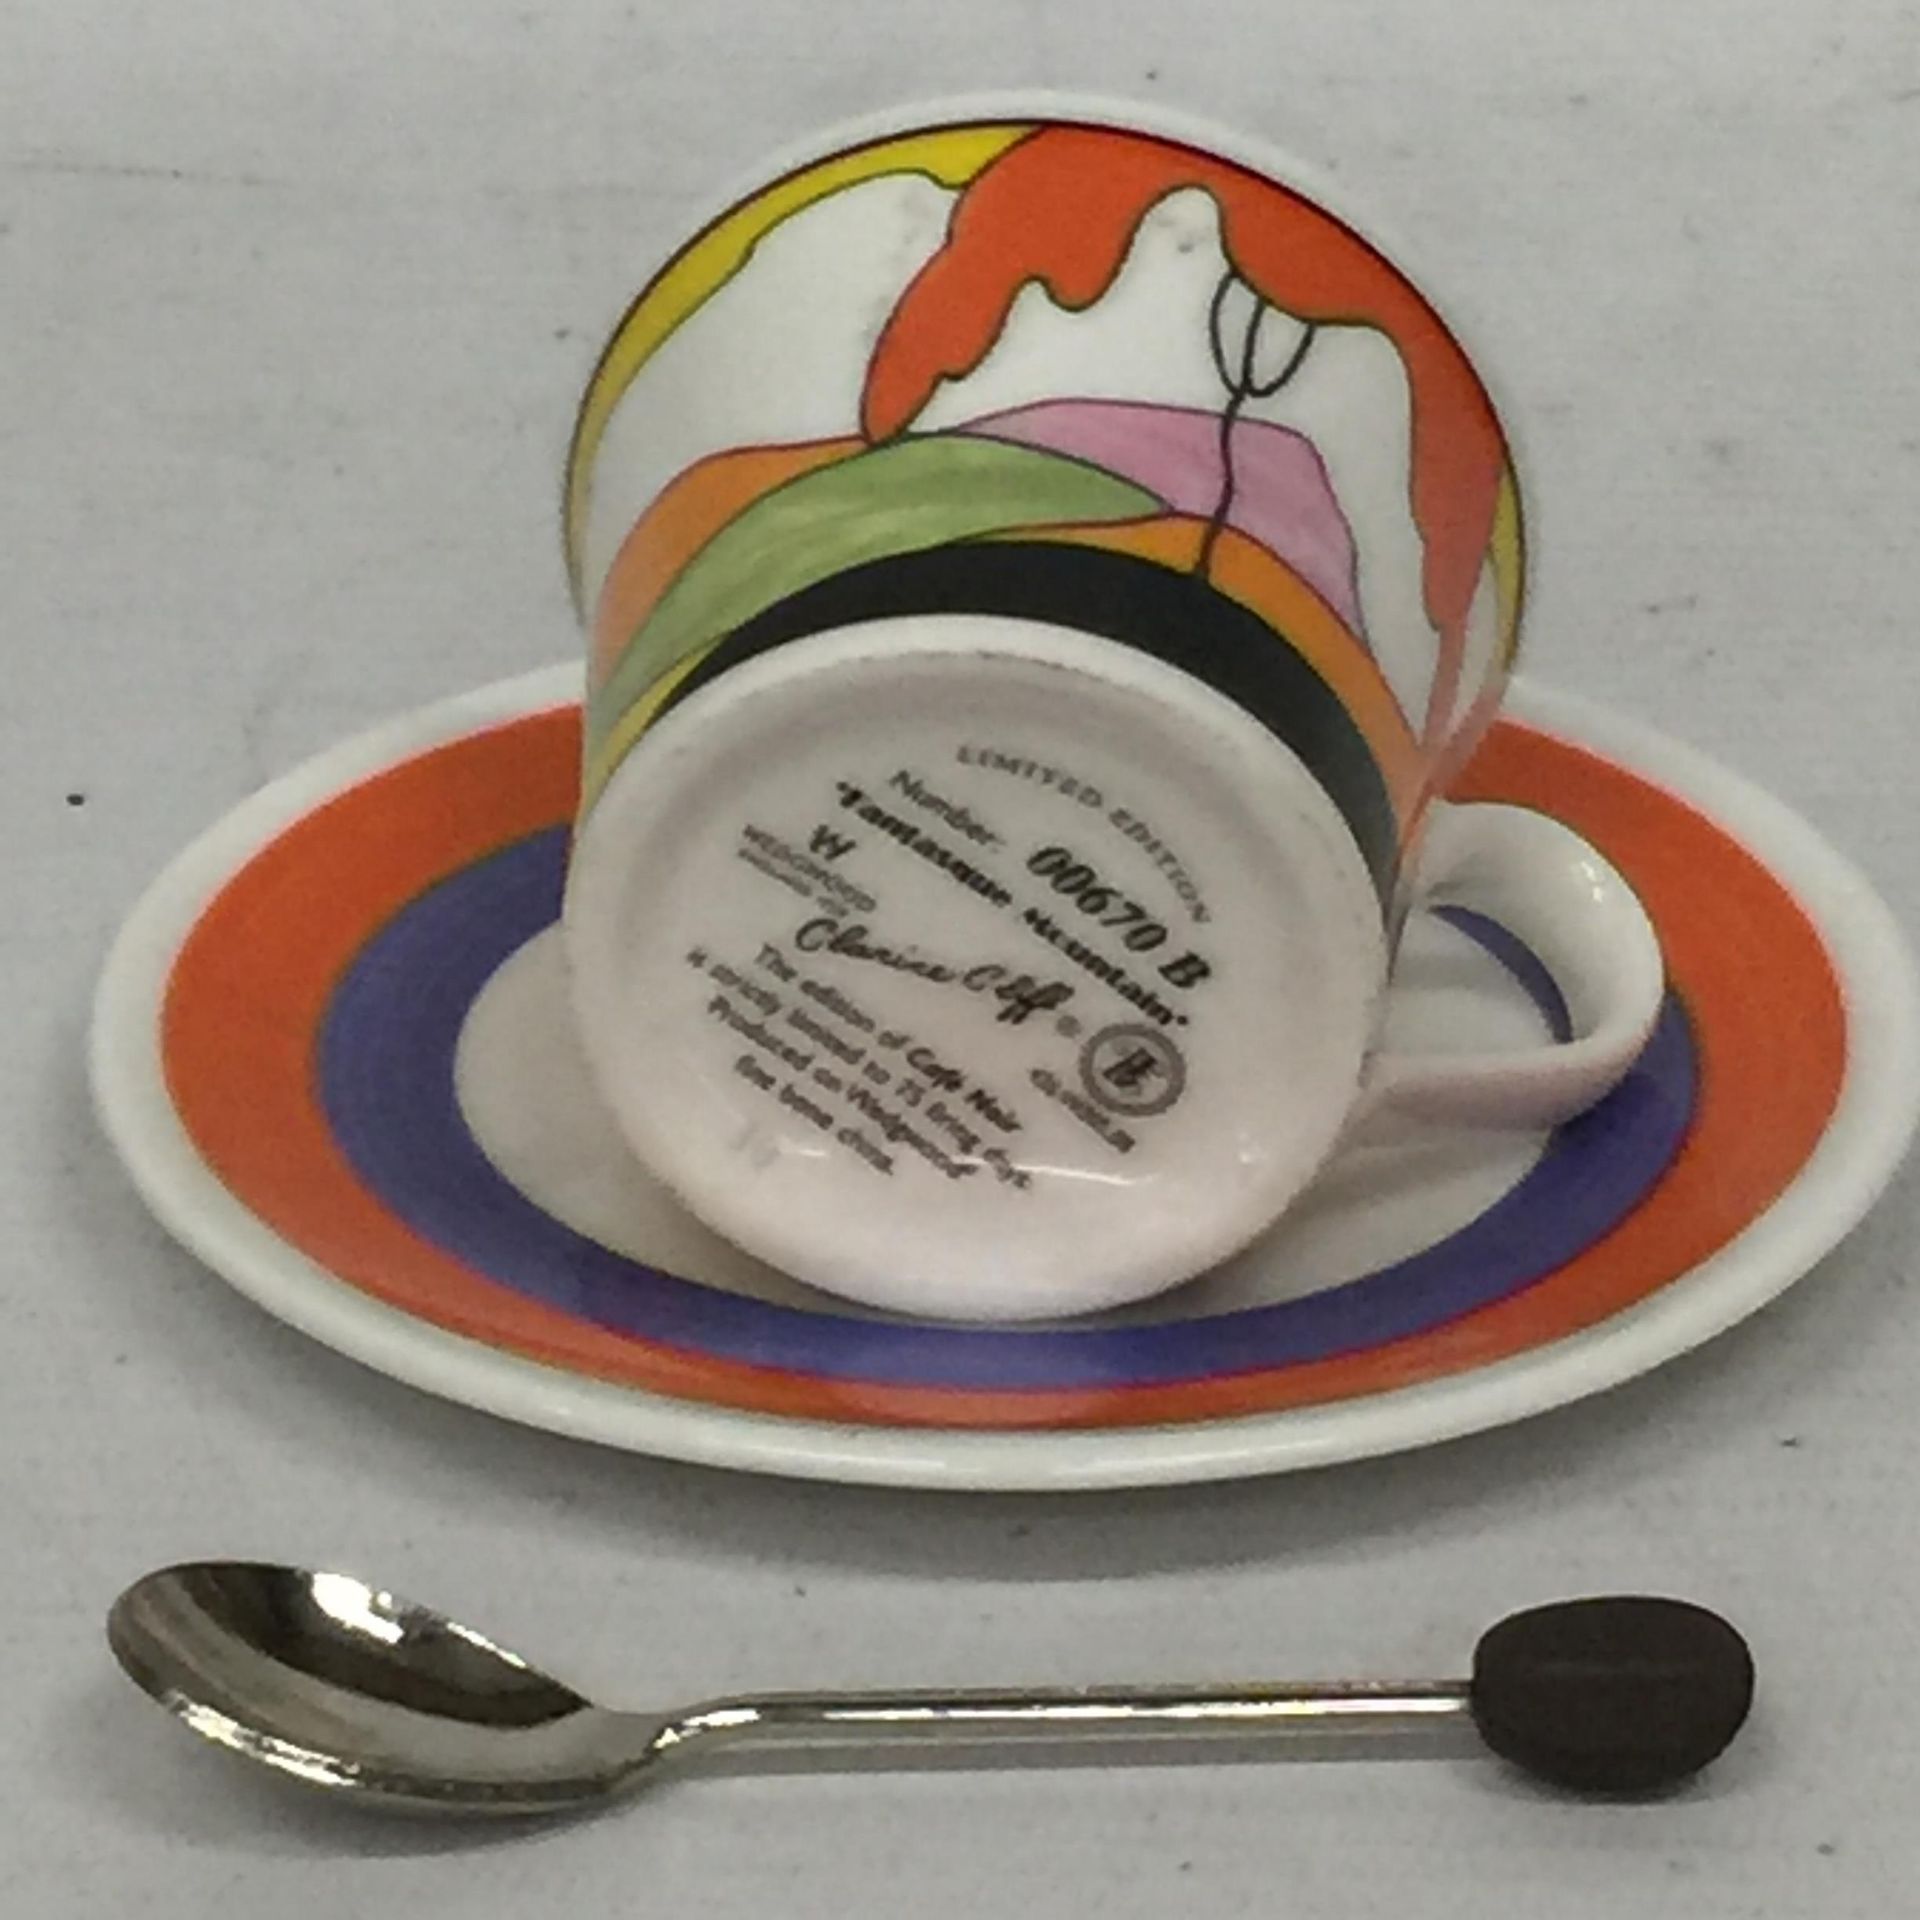 A WEDGEWOOD CLARICE CLIFF LIMITED EDITION CUP, SAUCER AND SPOON - Image 3 of 3